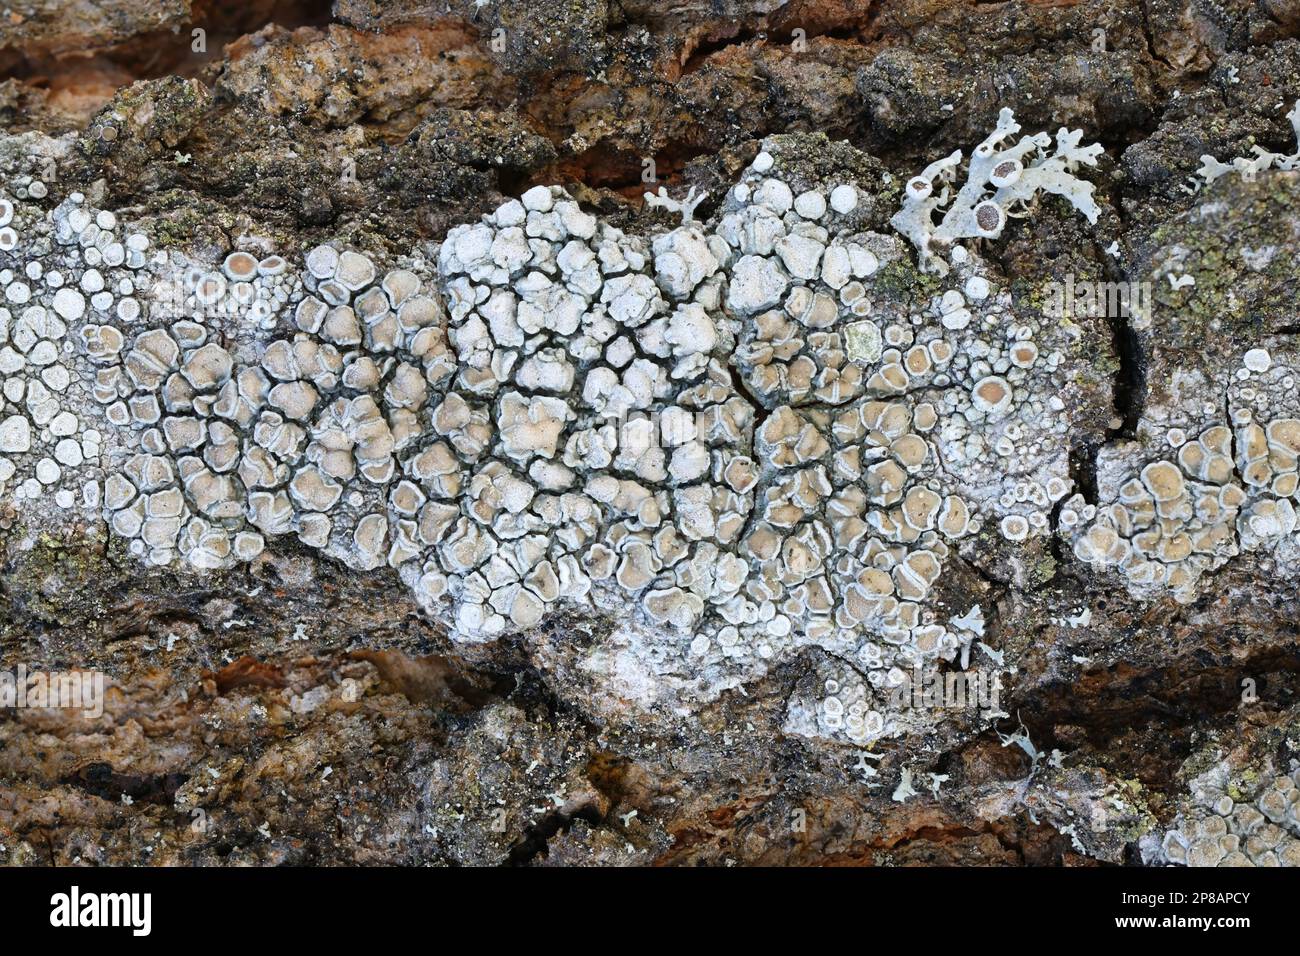 Lecanora chlarotera, known as brown rim-lichen, growing on Norway maple in Finland Stock Photo